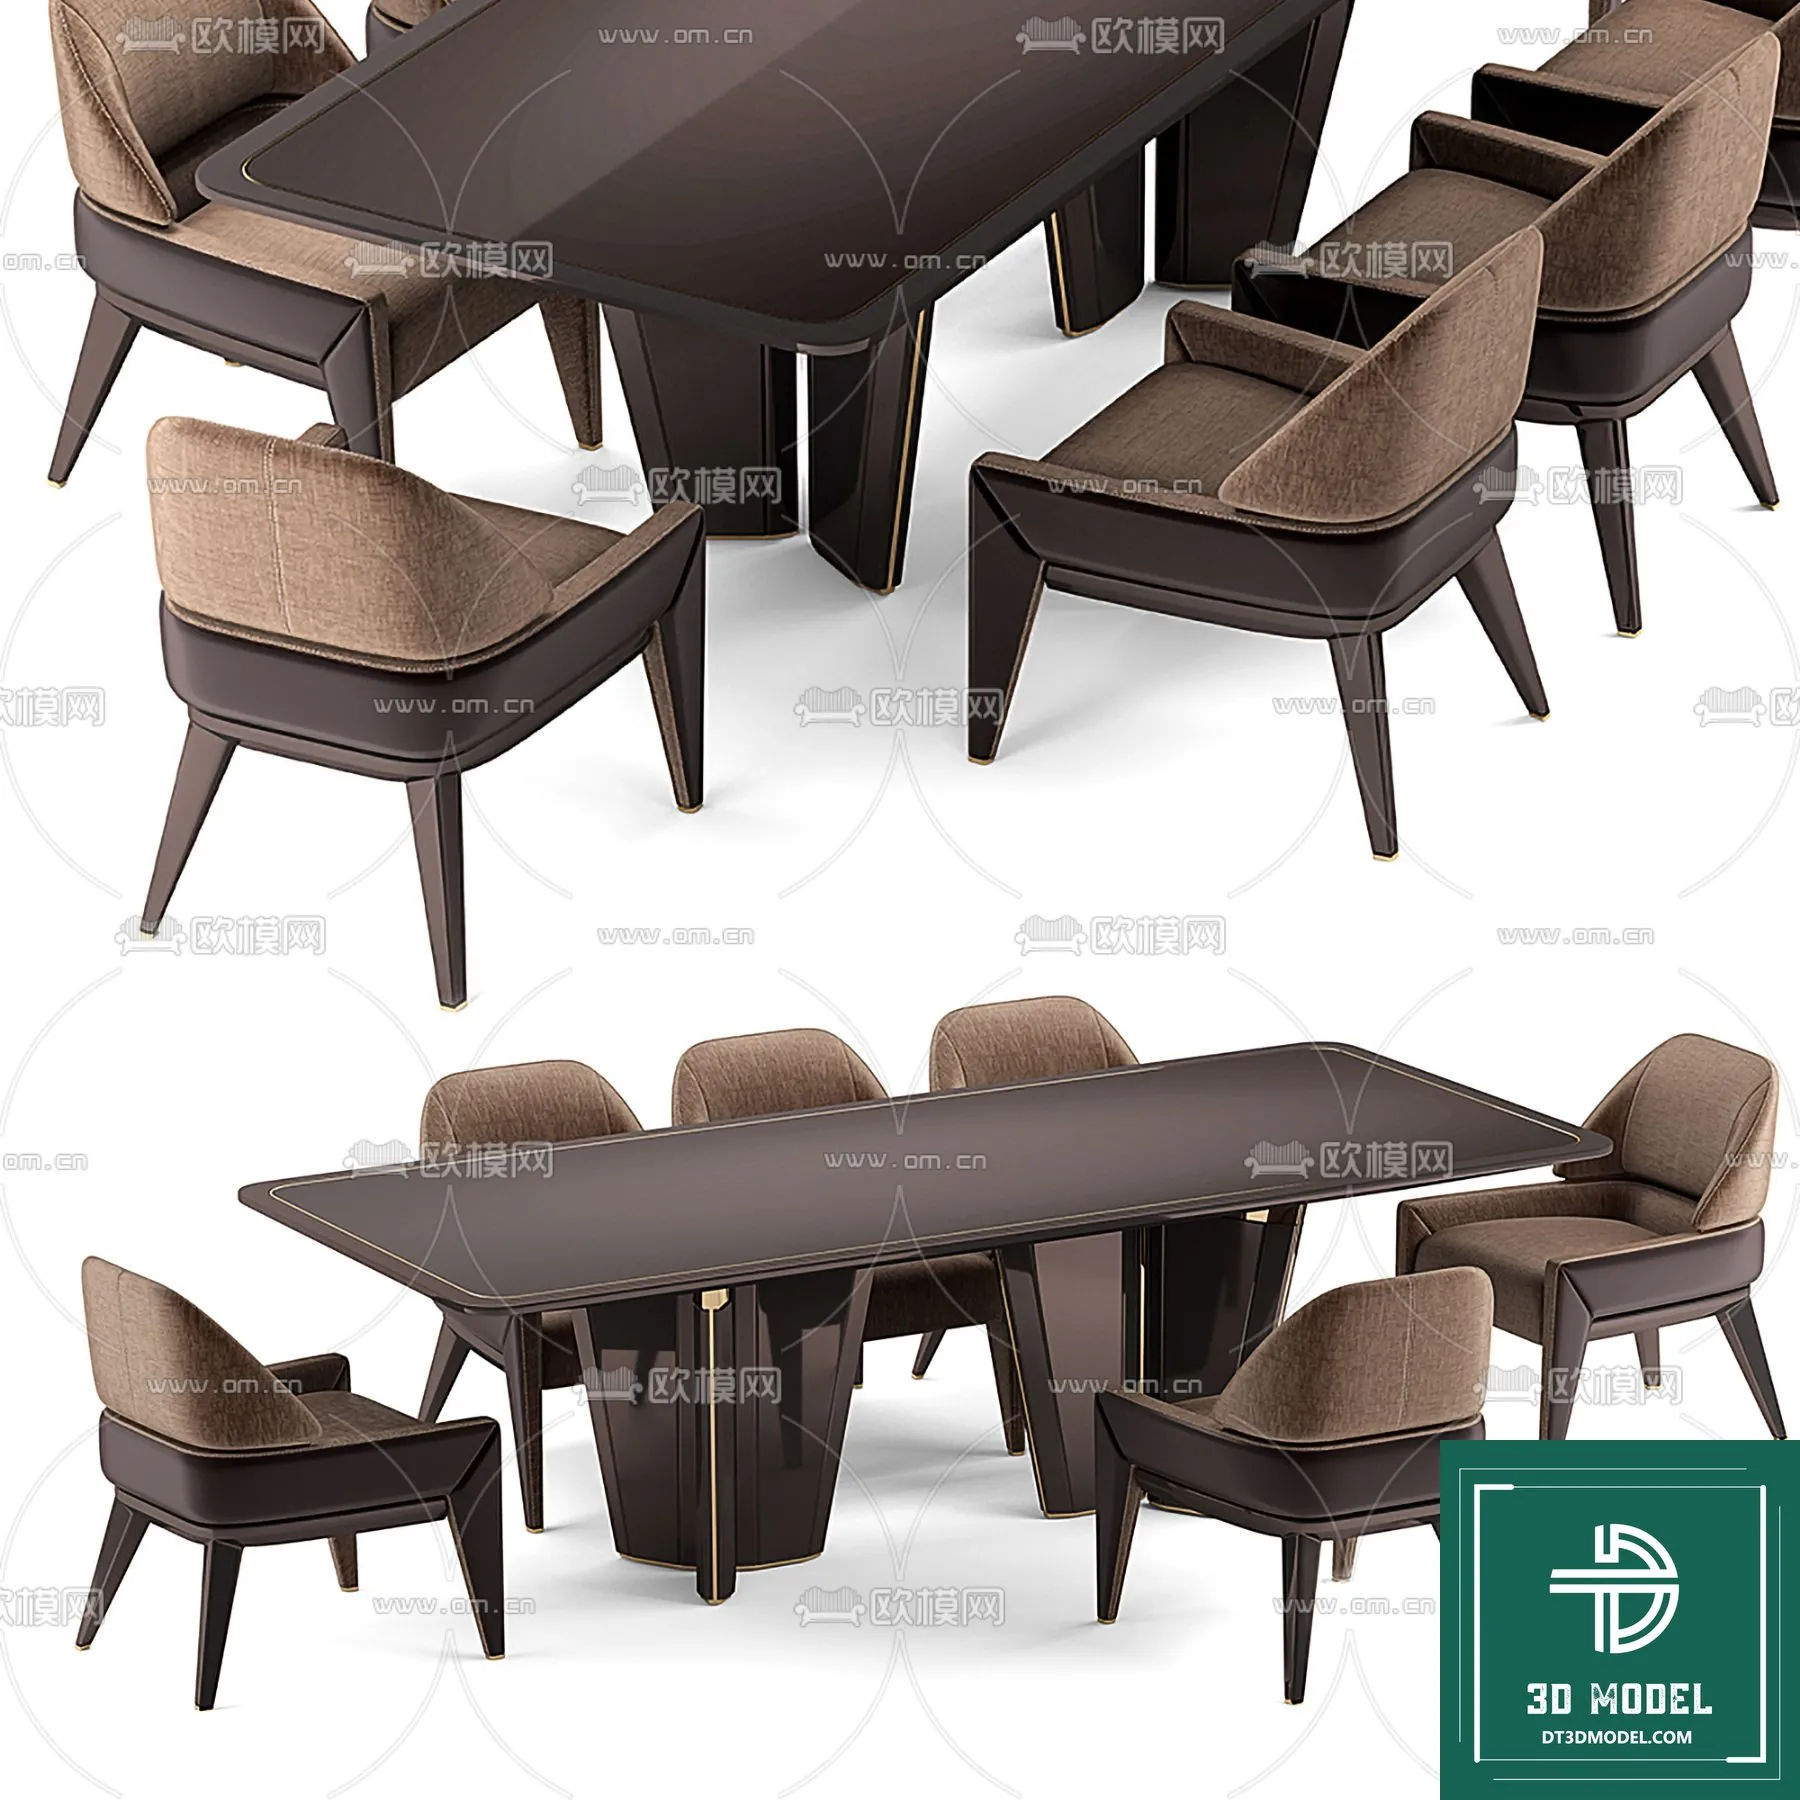 LUXURY – 3D Models – DINING TABLE SETS – 026